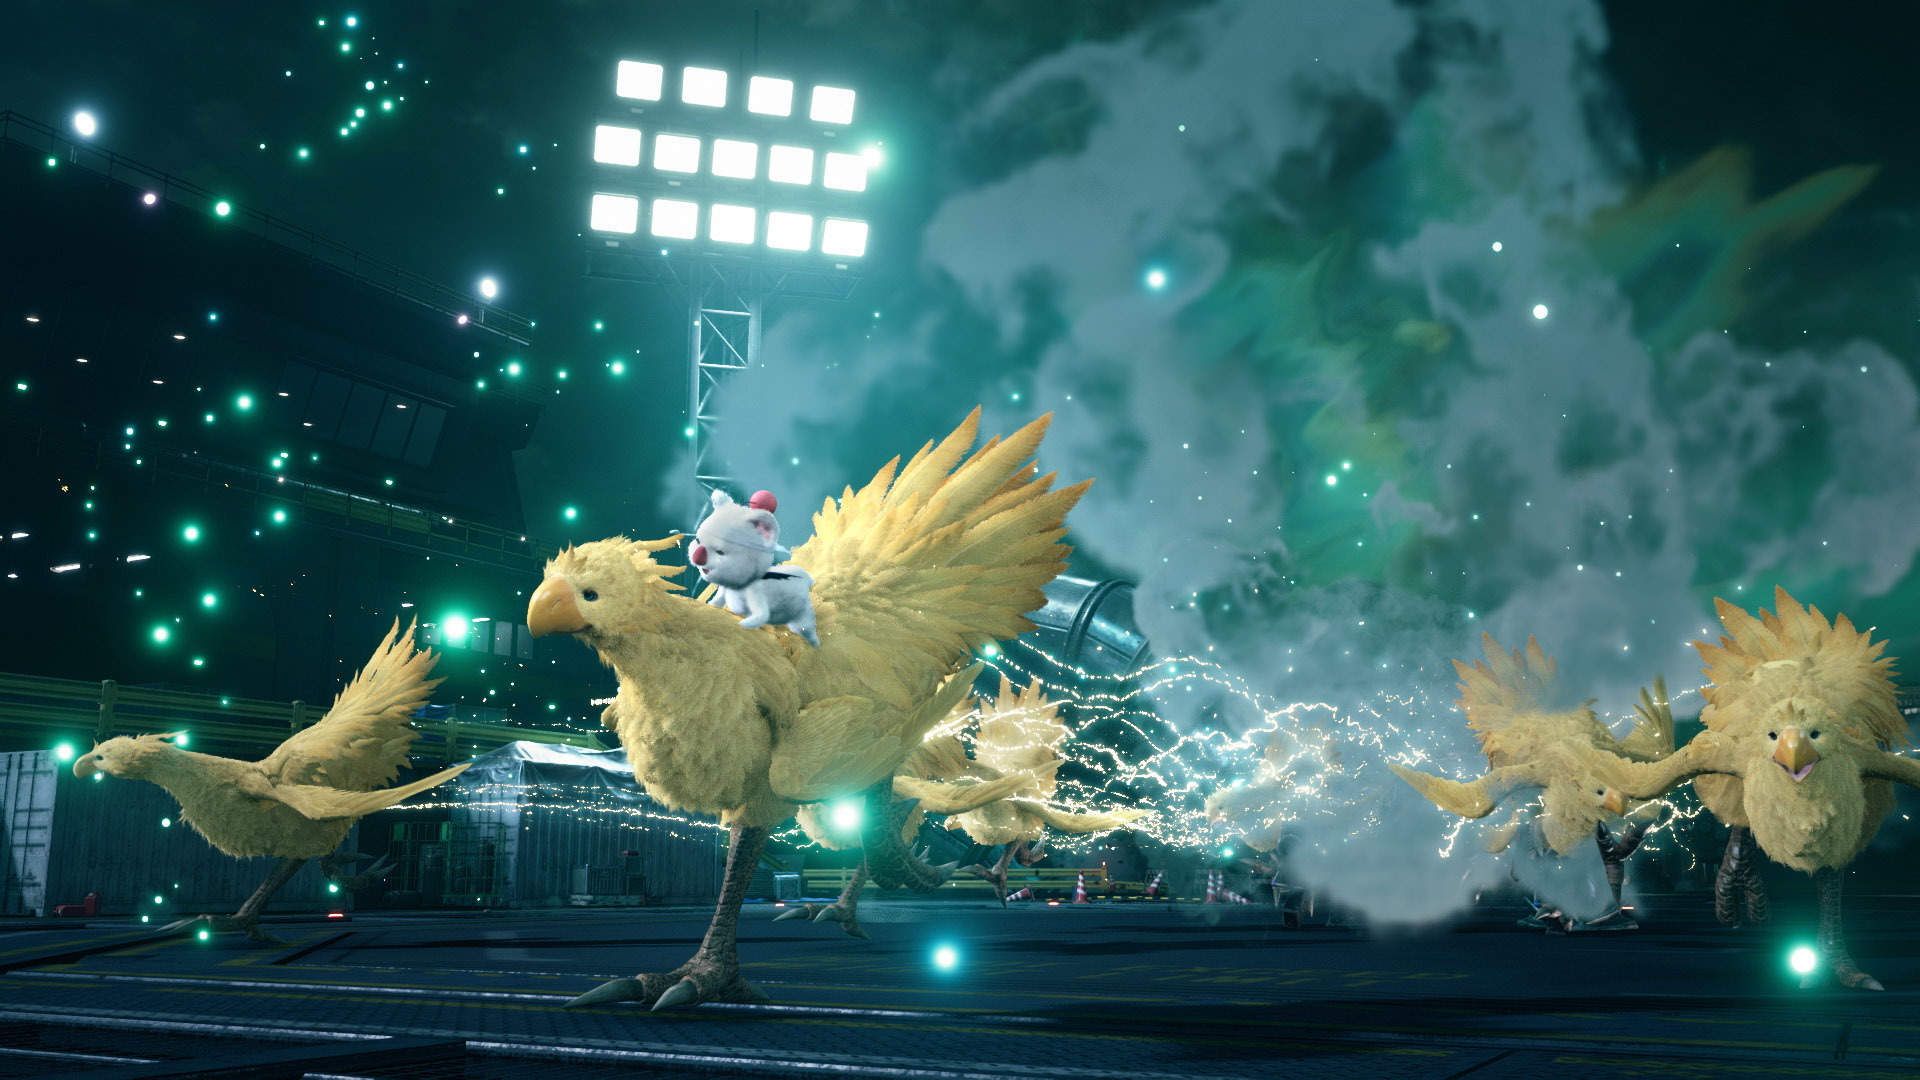 final fantasy 7 remake chocobo and moogle summon stampede